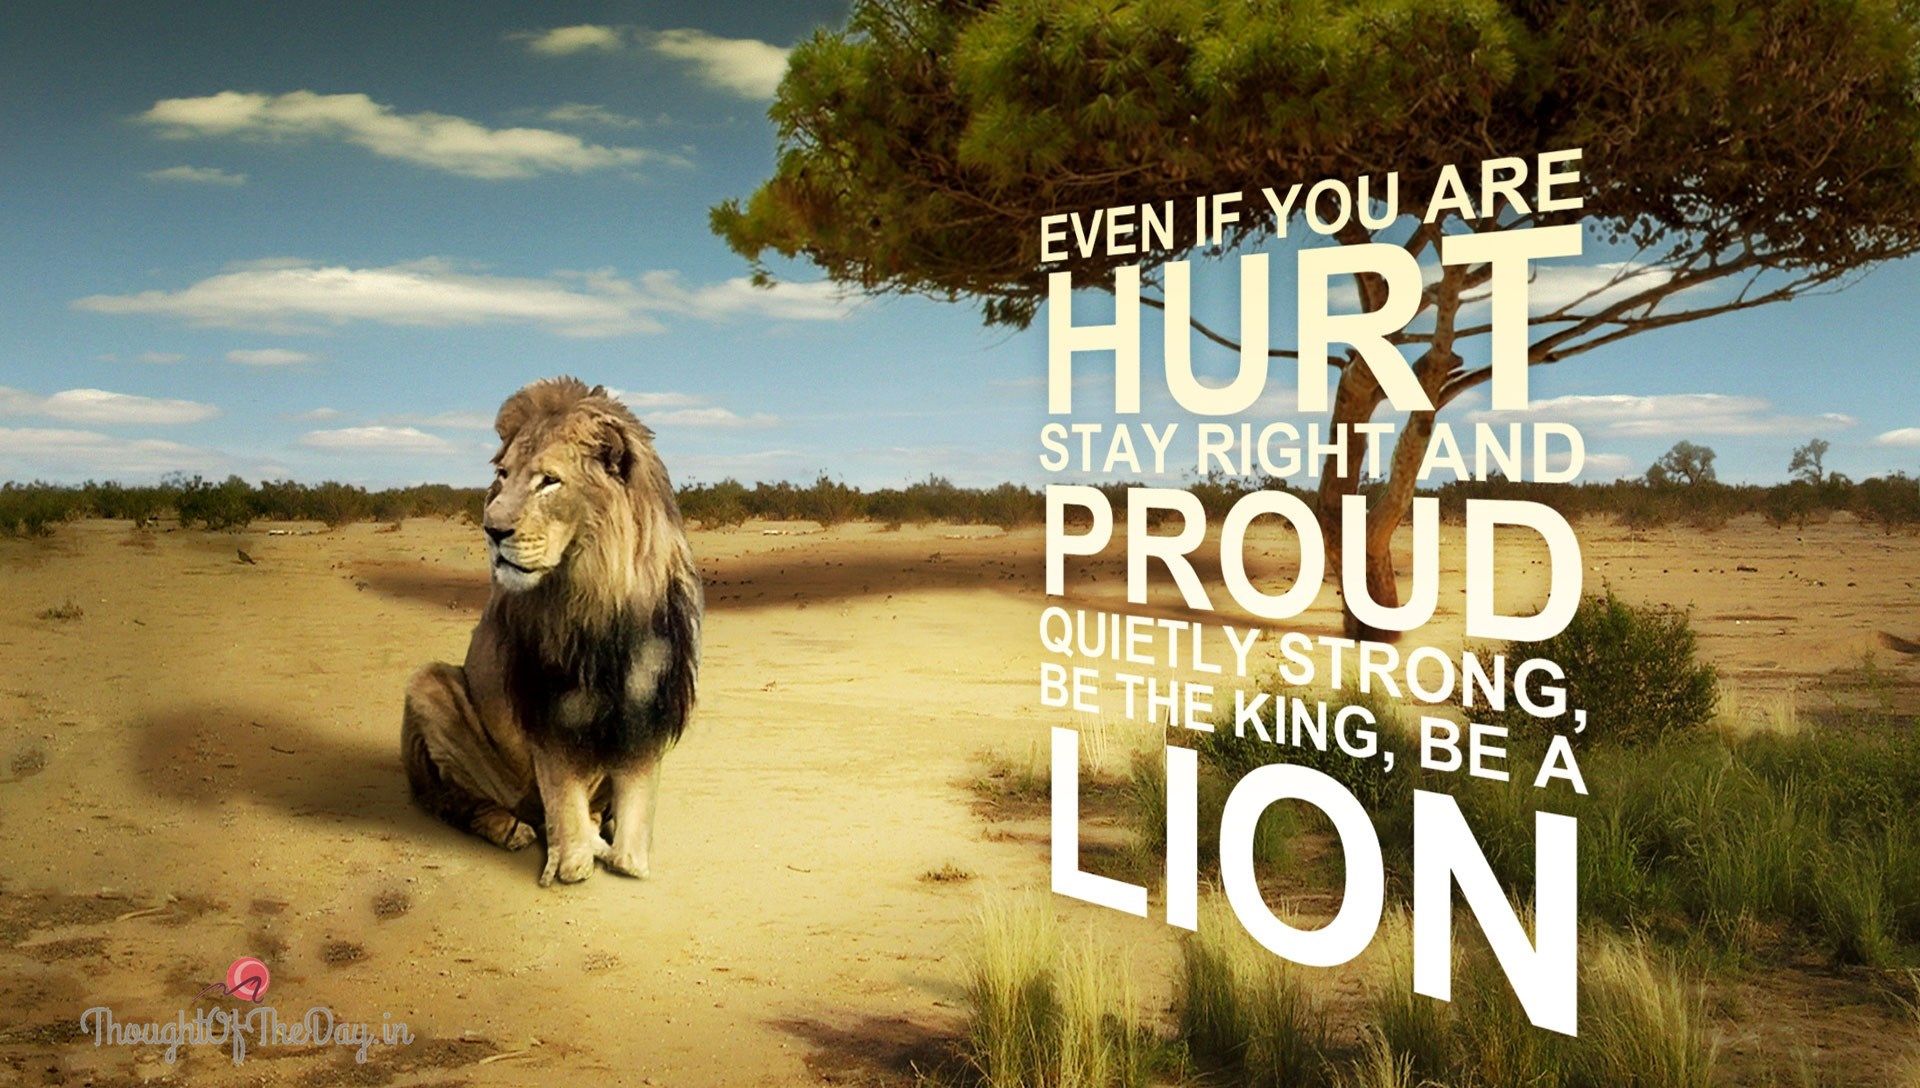 Hd Wallpaper Of Lion With Quotes - 1920x1088 Wallpaper 